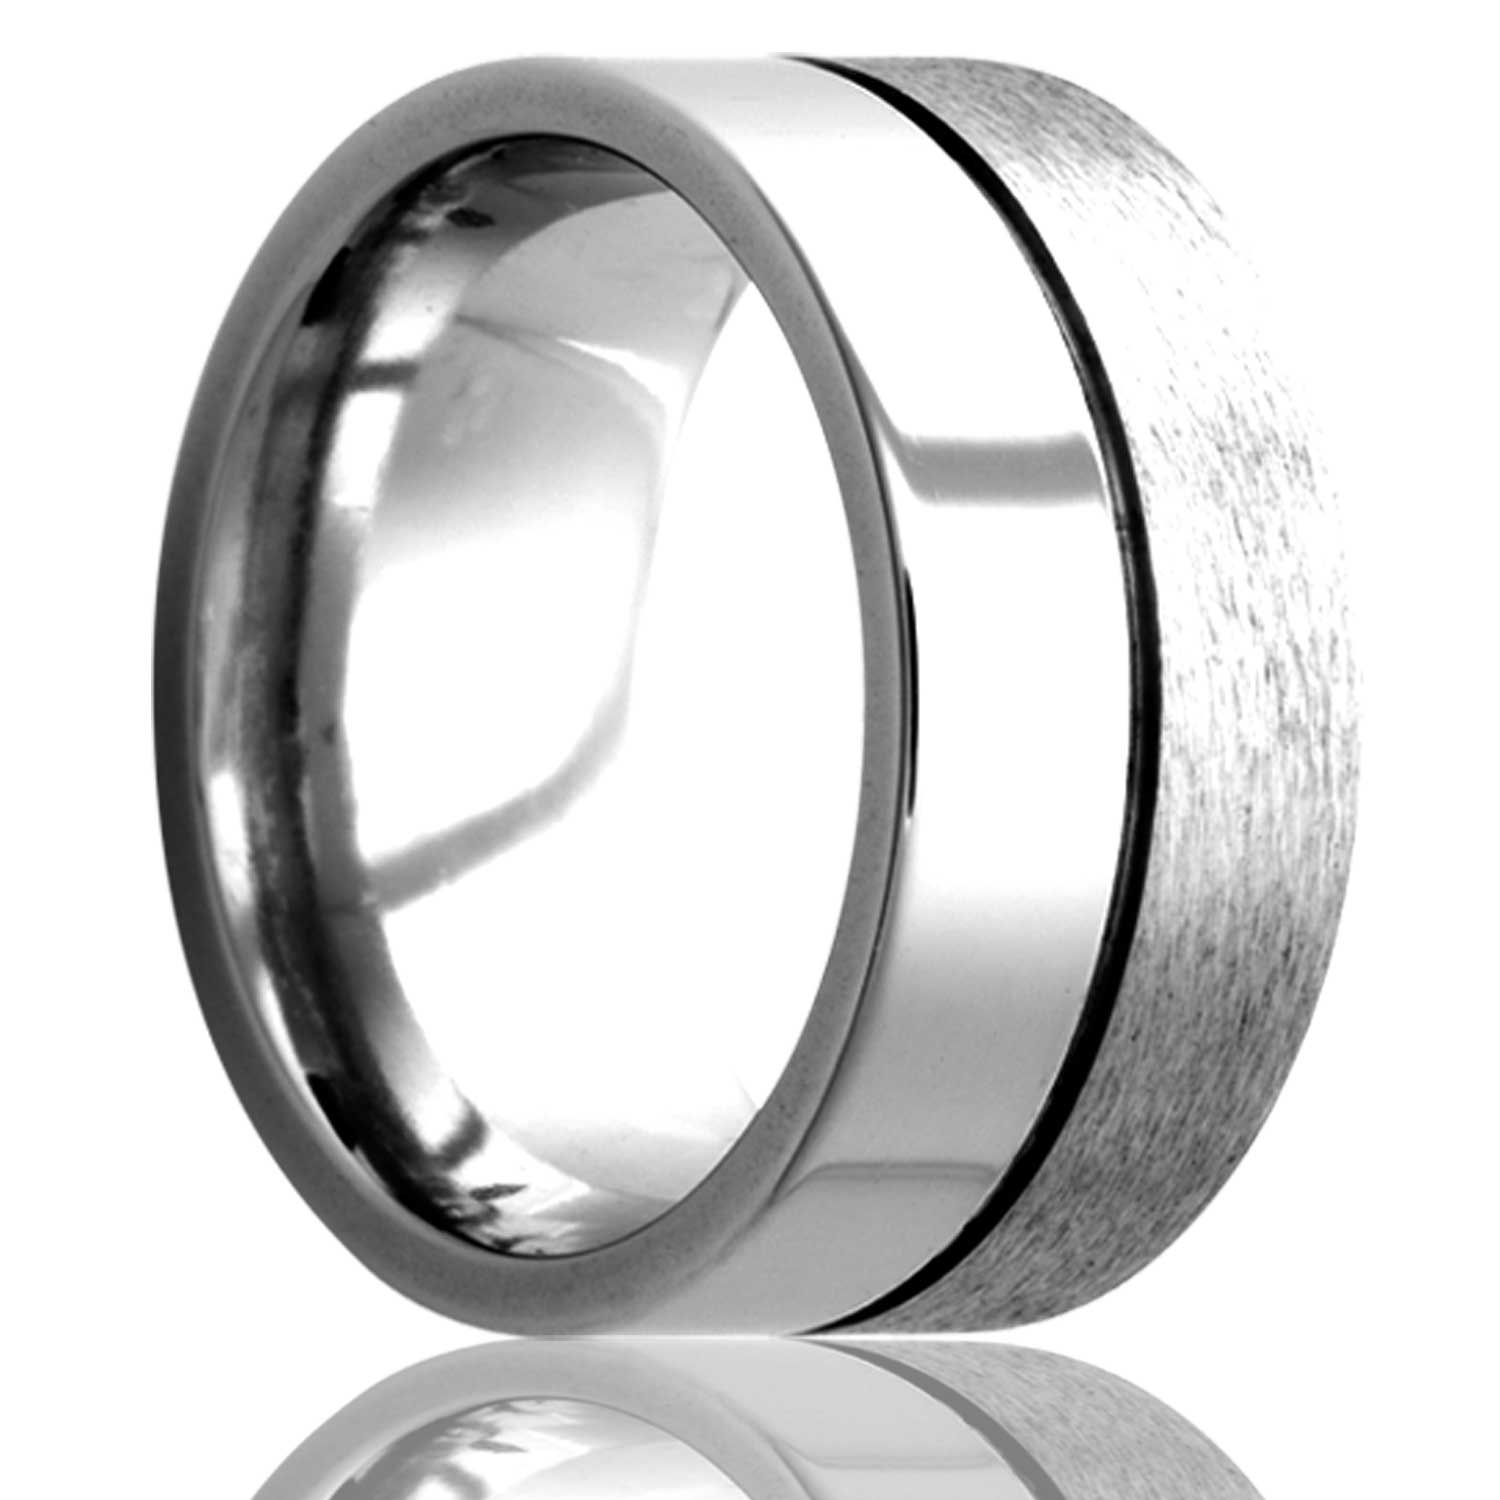 A grooved cobalt wedding band with half polished & satin finishes displayed on a neutral white background.